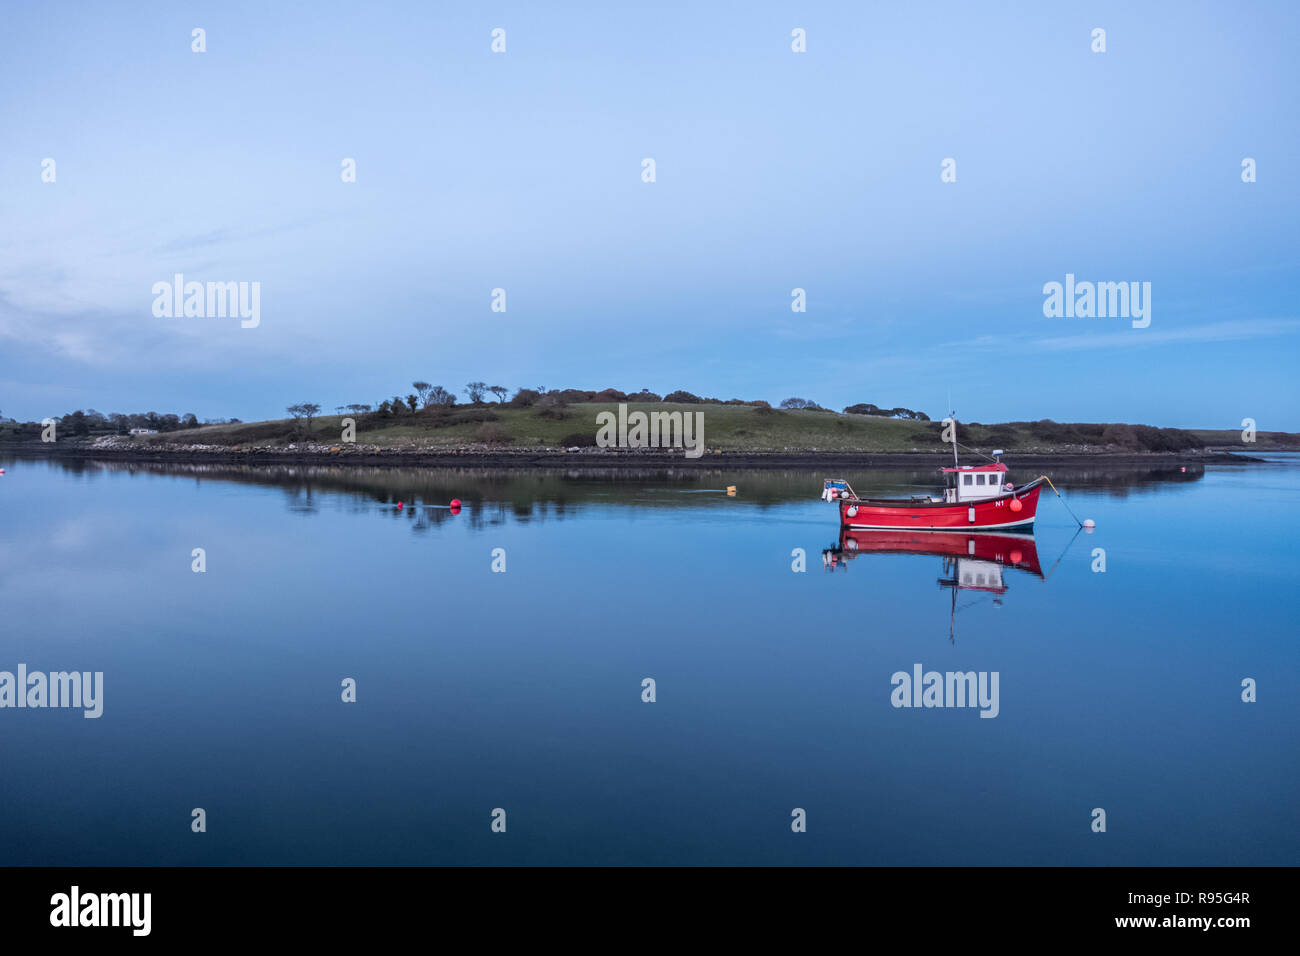 Little red fishing boat reflection Stock Photo